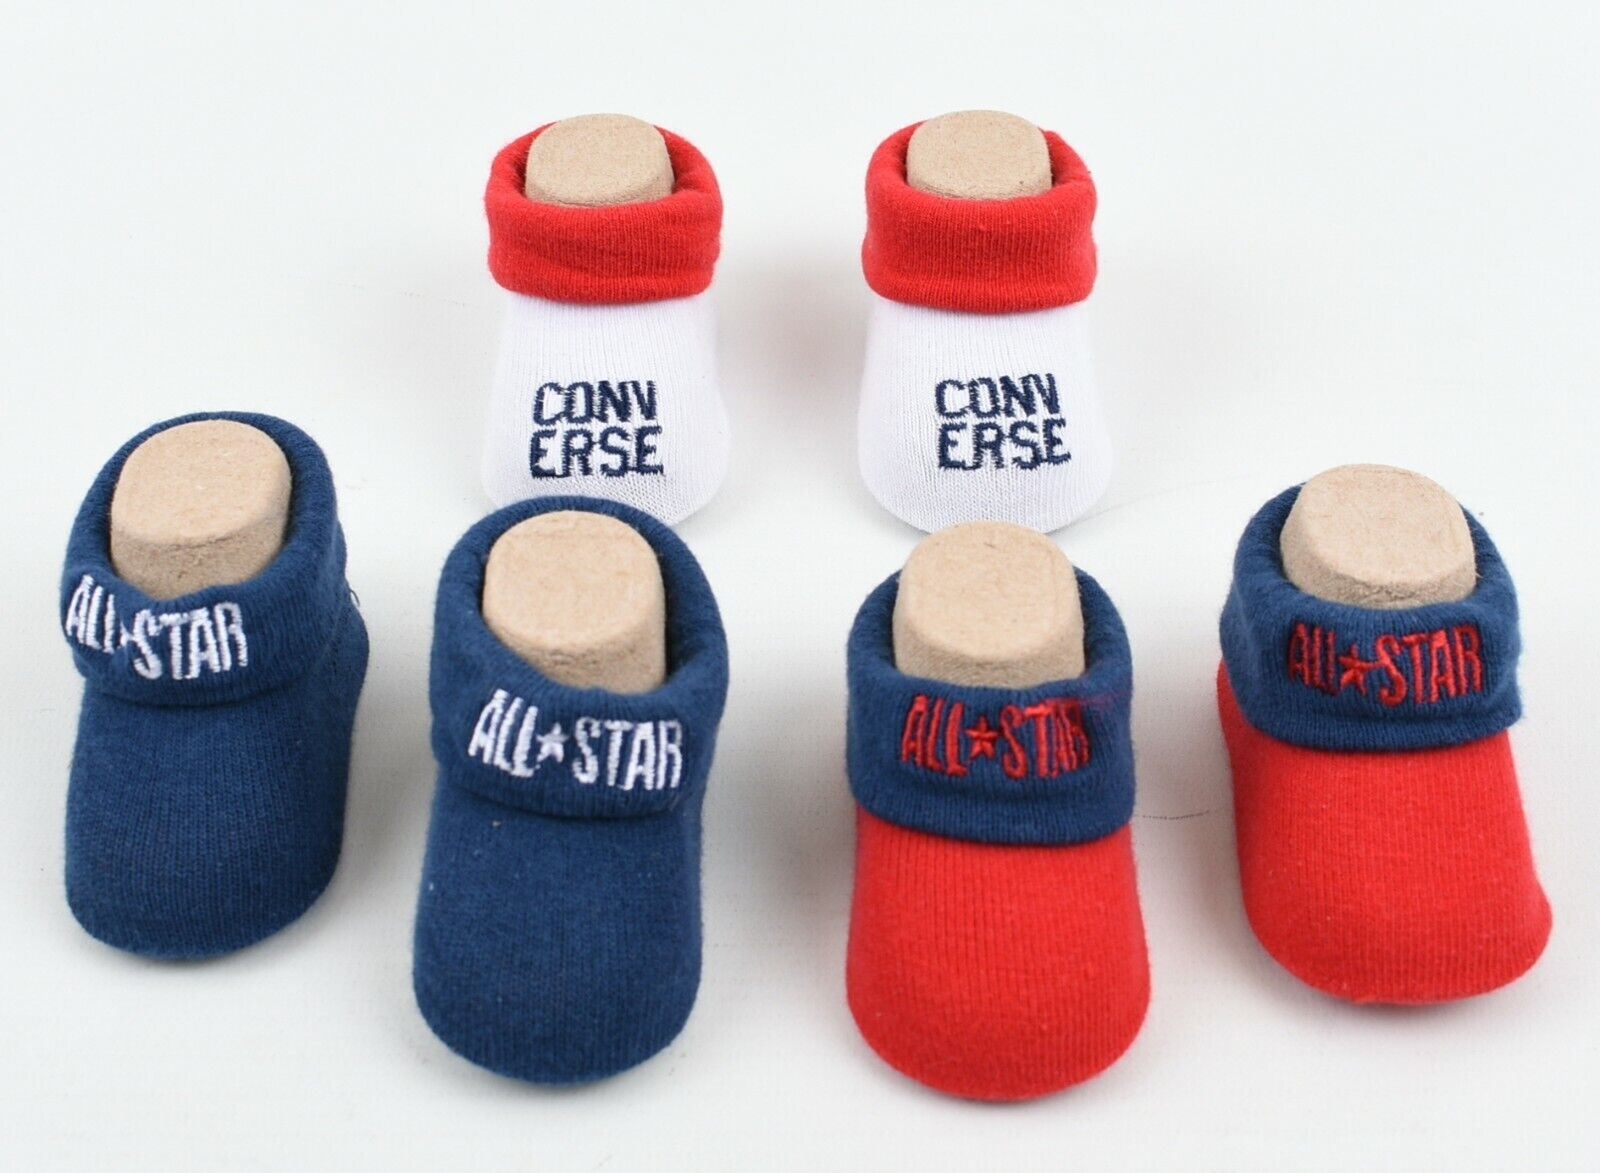 CONVERSE Baby Girls' Boys' 3-pack Sock Booties, White/Red/Blue, 0-6 months